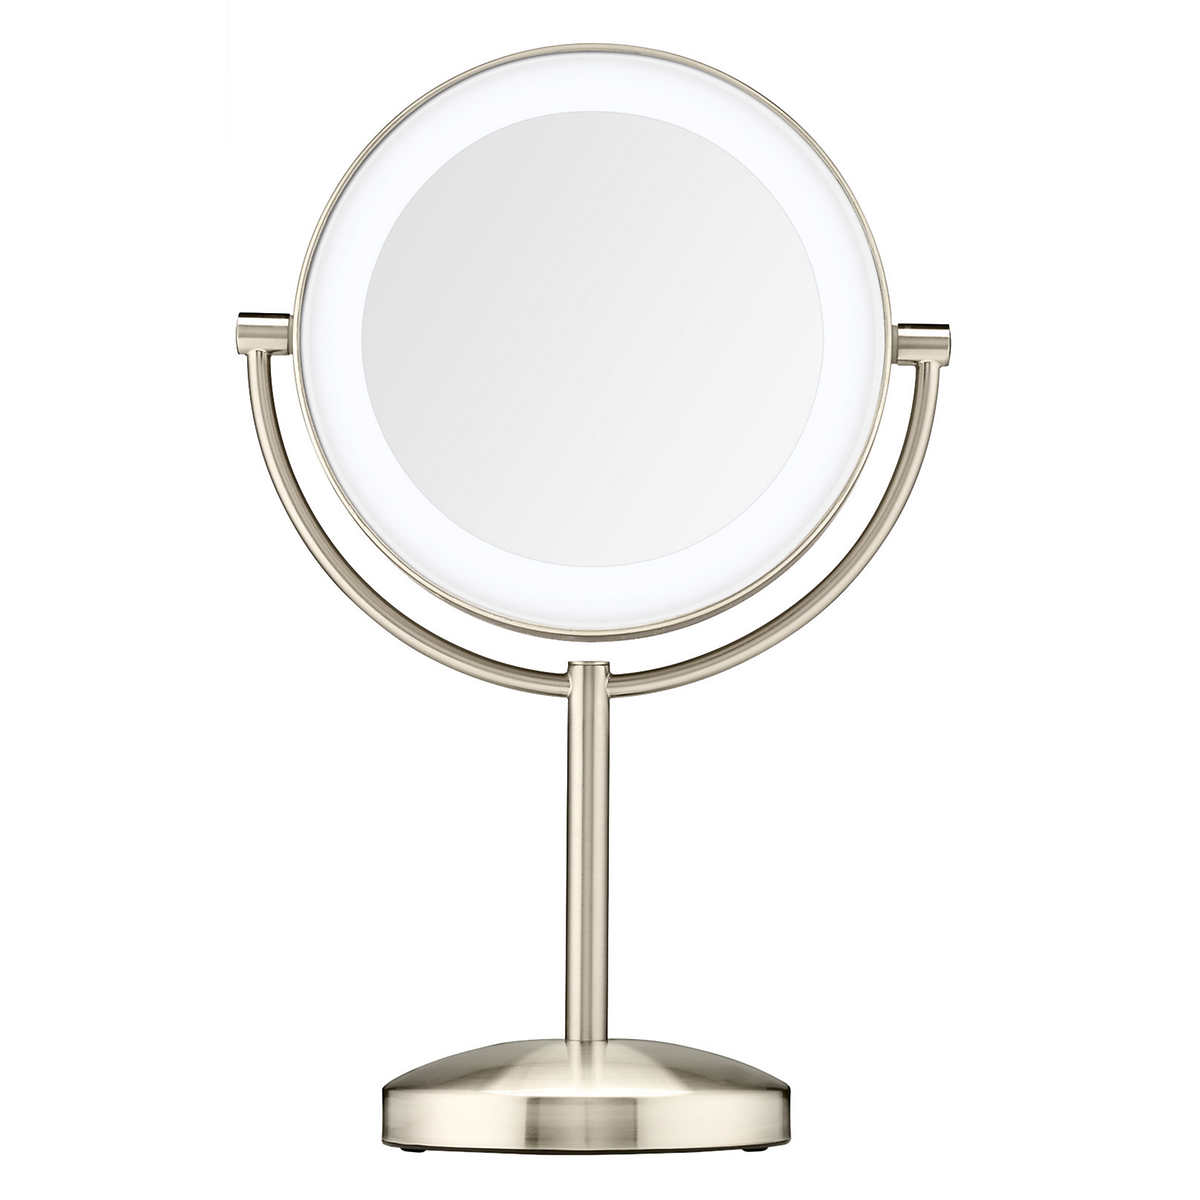 Reflections Led Lighted Mirror By, Lighted Makeup Mirror Costco